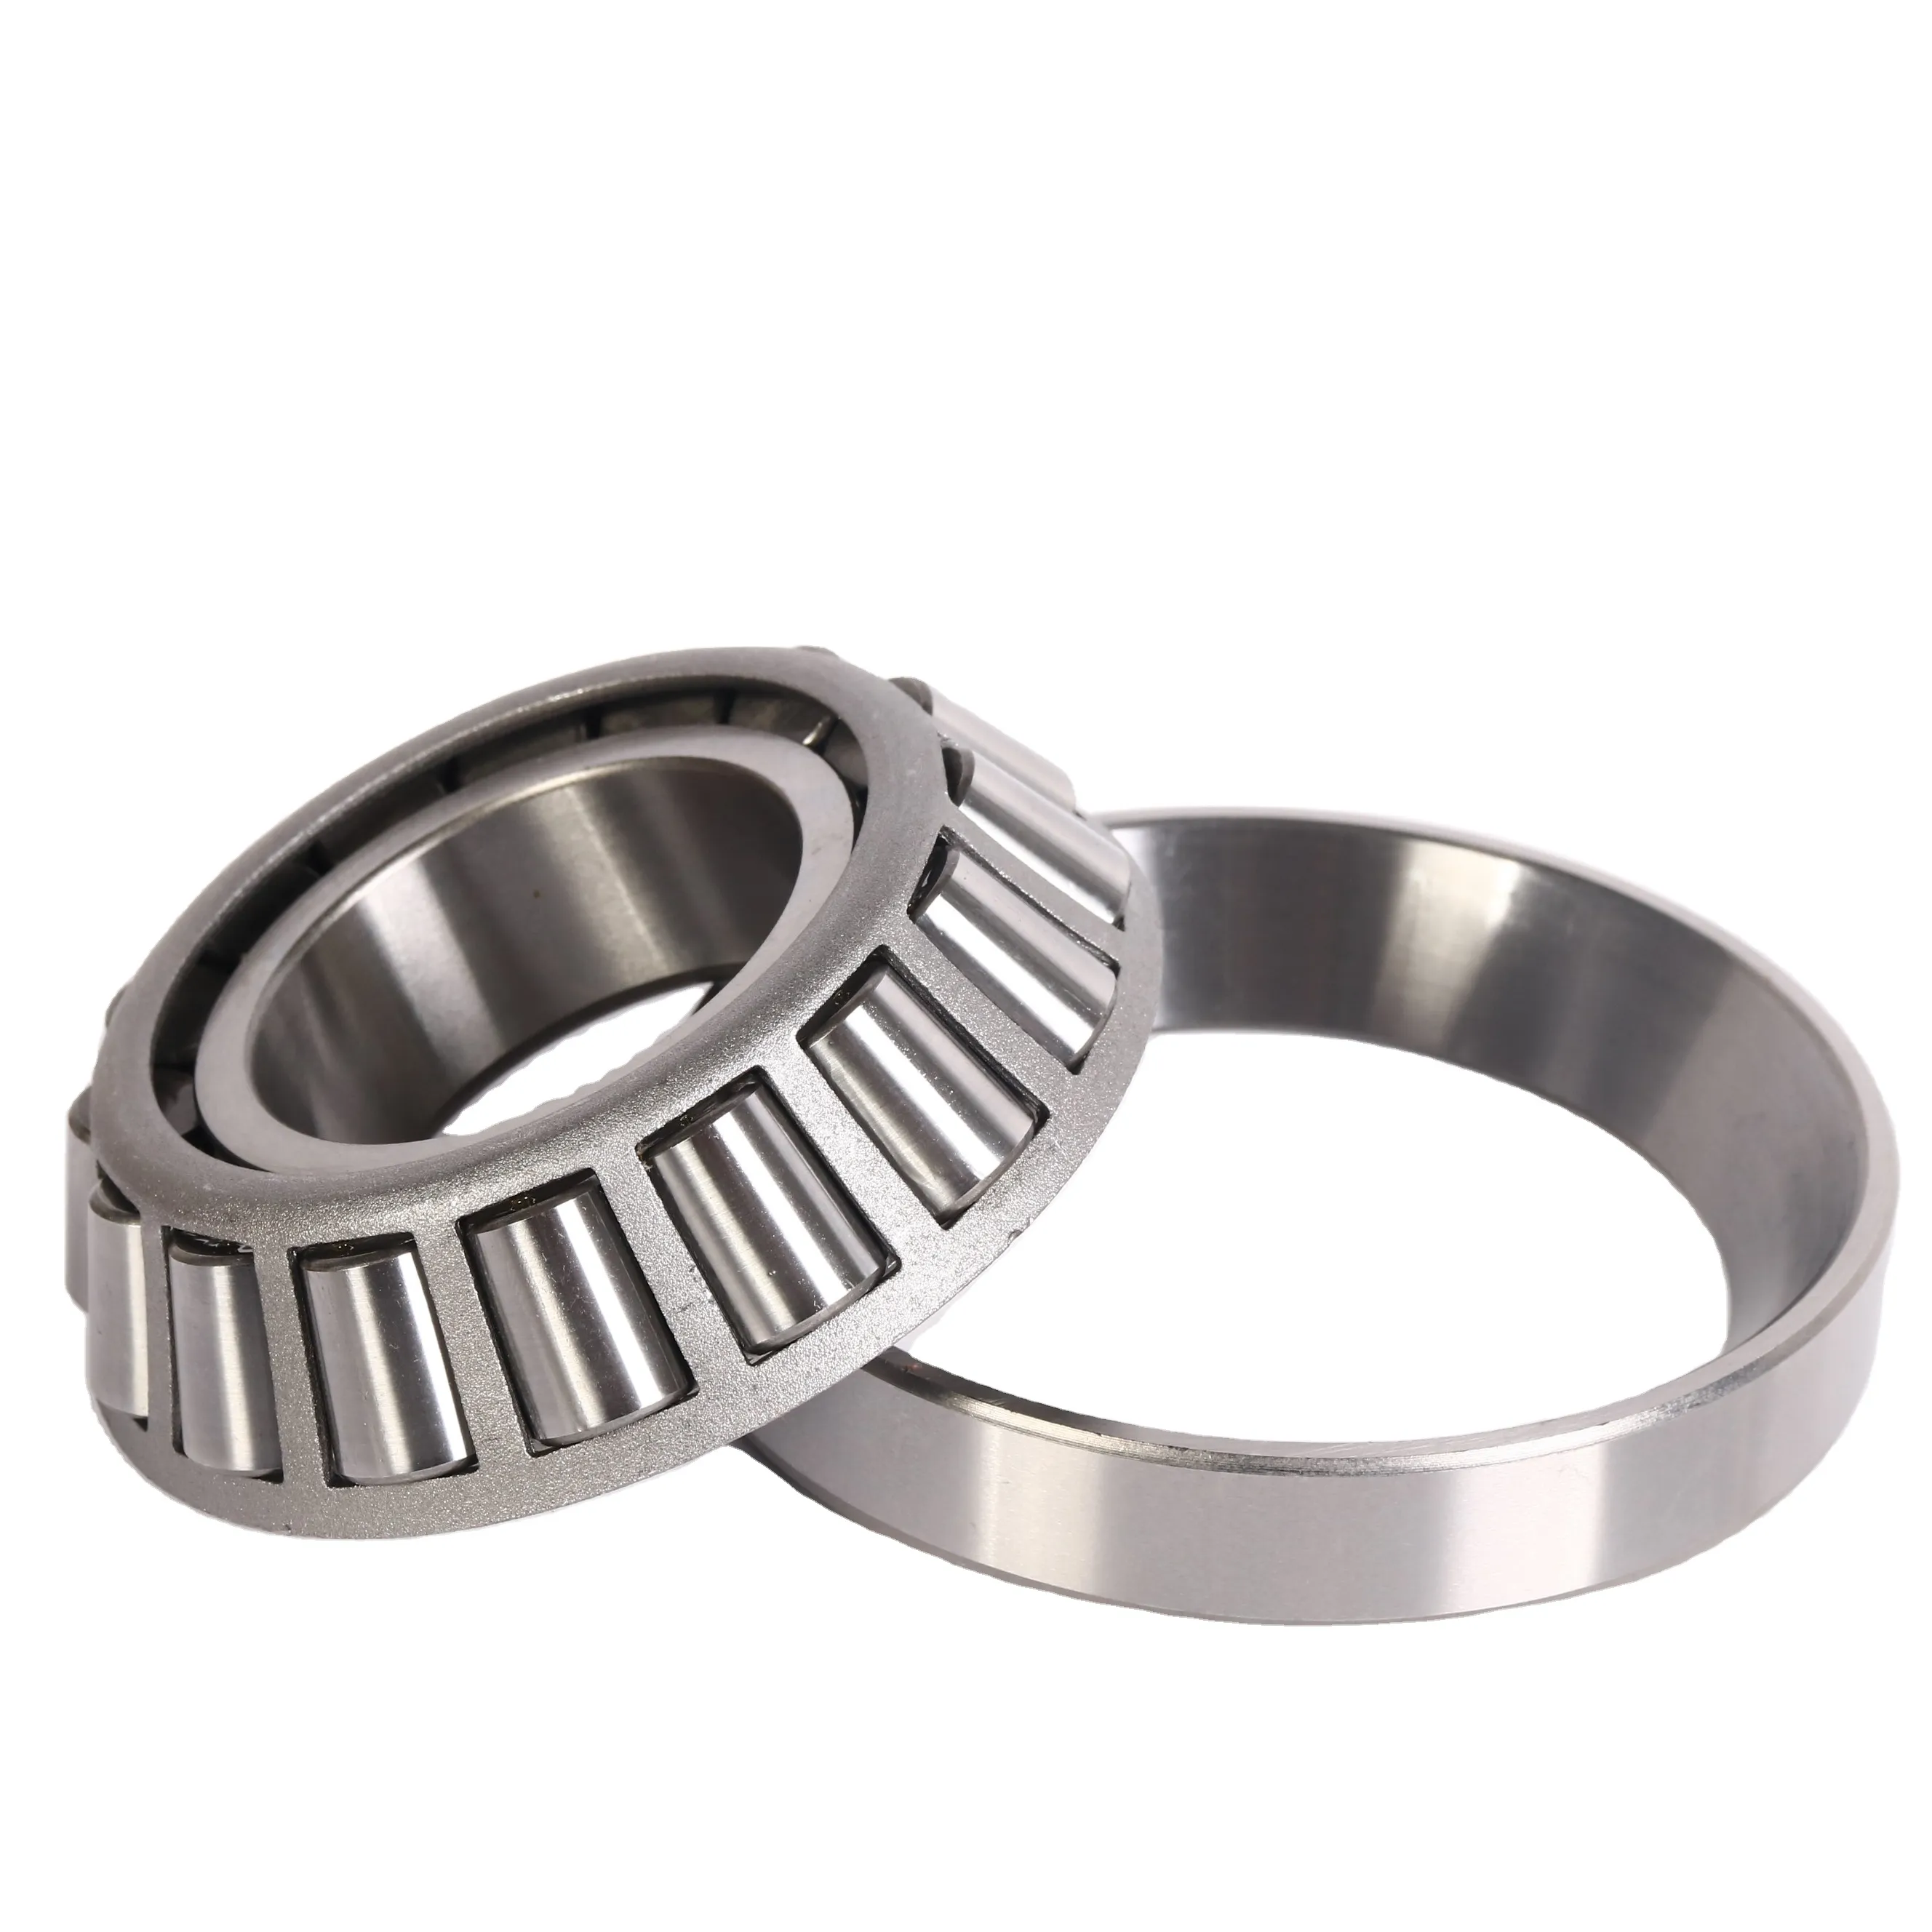 High Speed Original KOYO Taper Roller Bearing 32220 Suitable for Automotive and Tractor